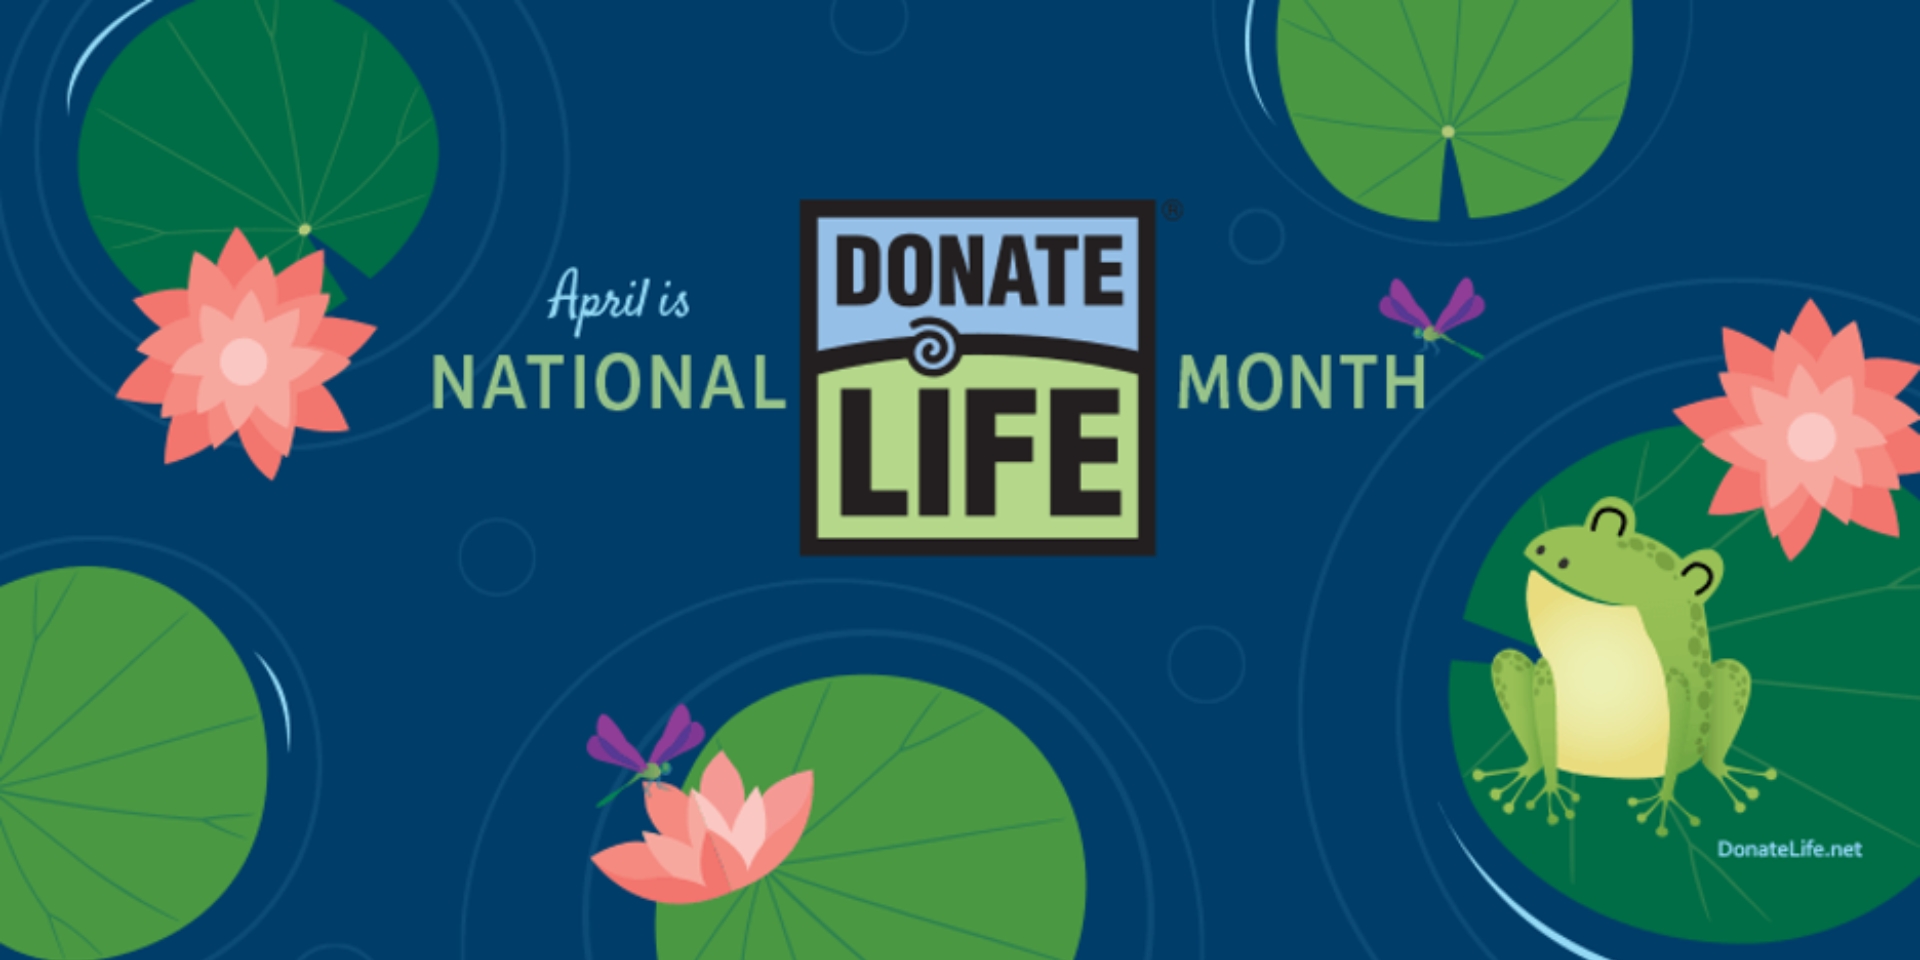 The image is the logo for National Donate Life Month.